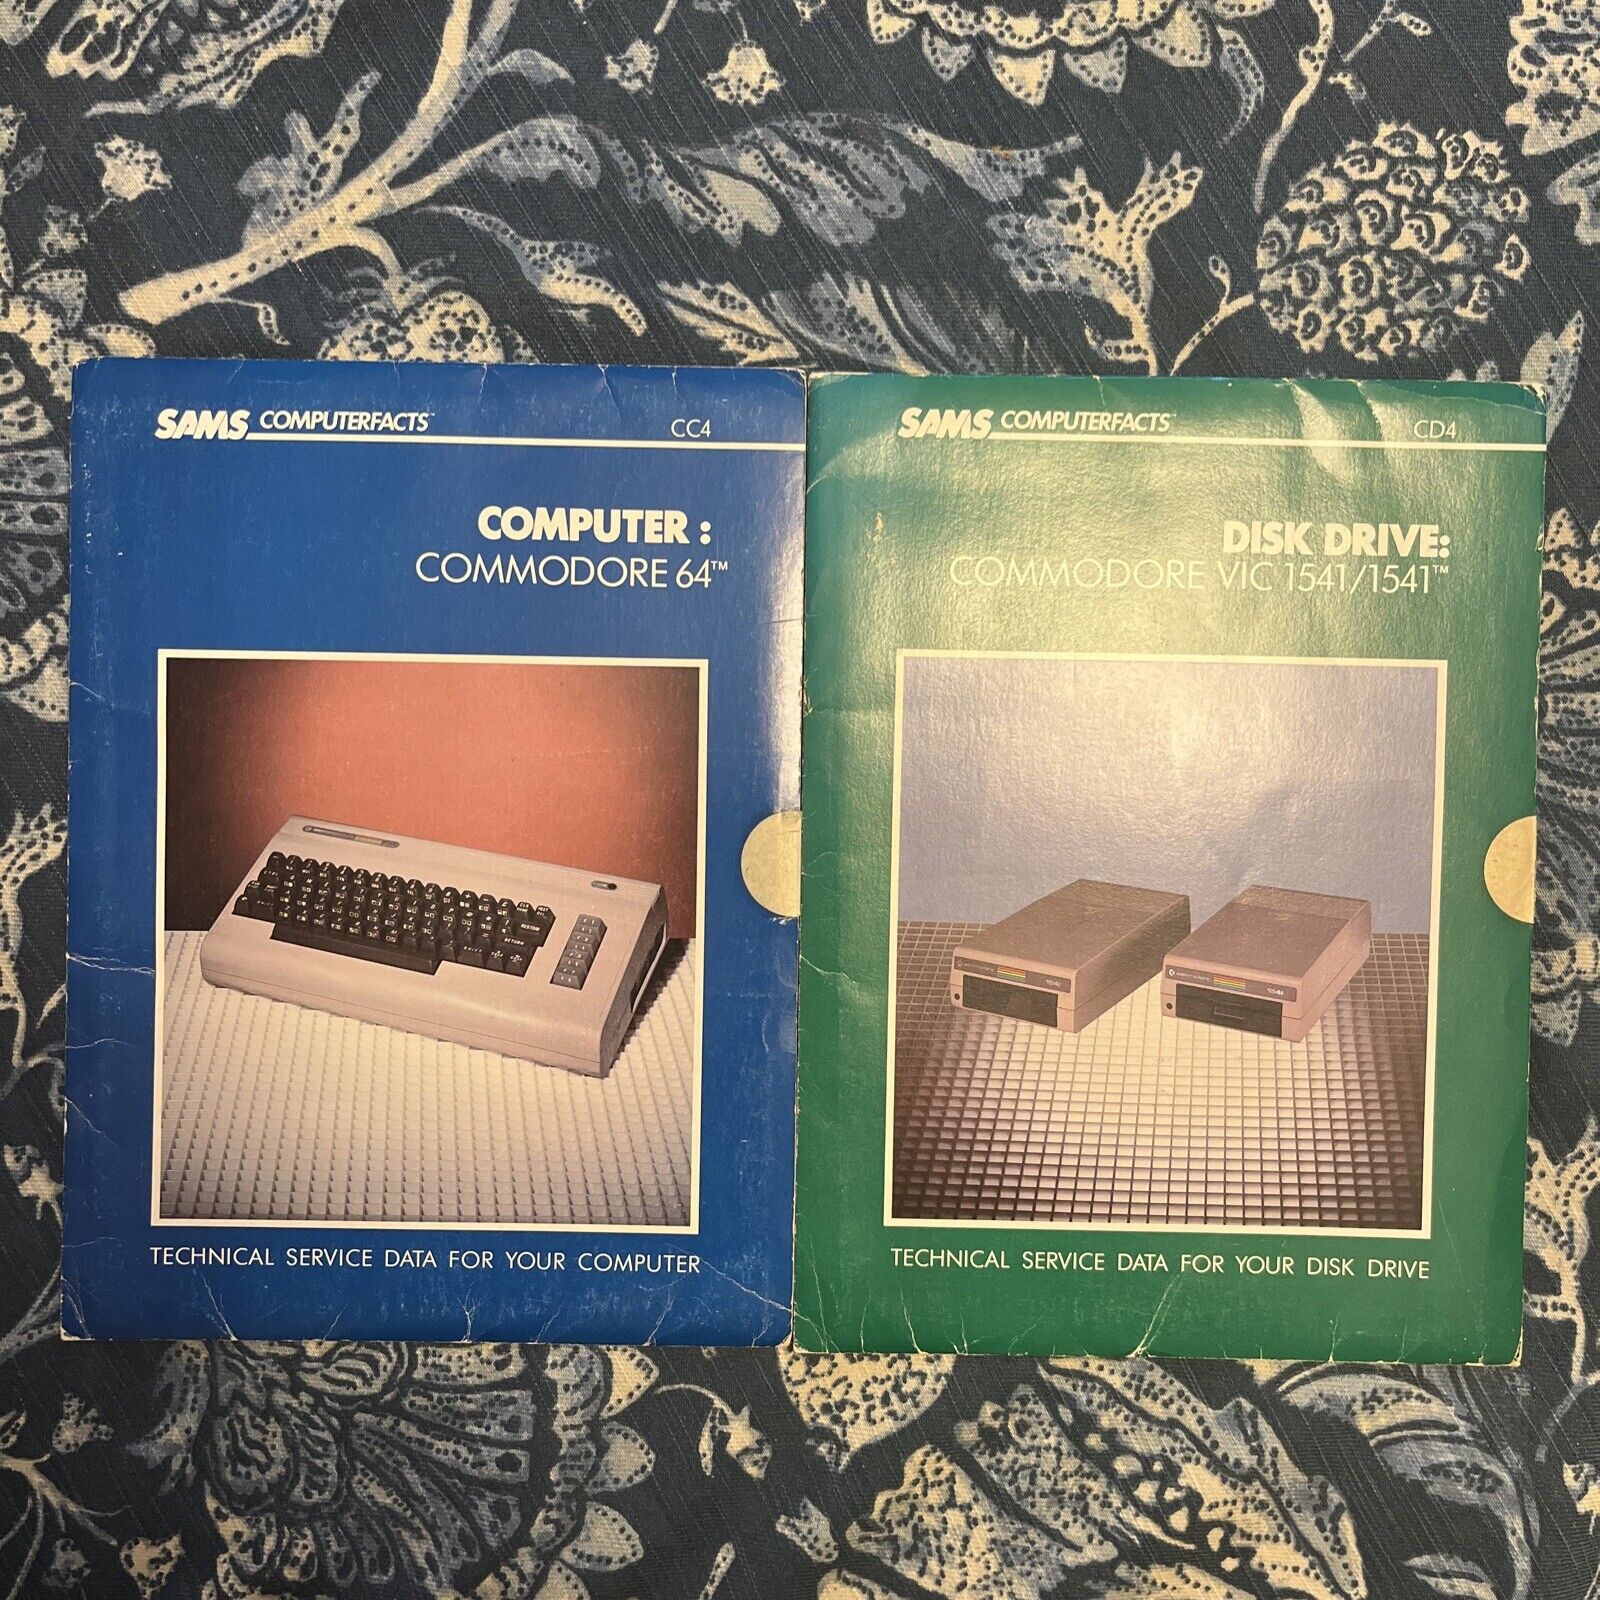 Sams ComputerFacts Technical Service Data Commodore 64 & VIC 1541 Lot READ